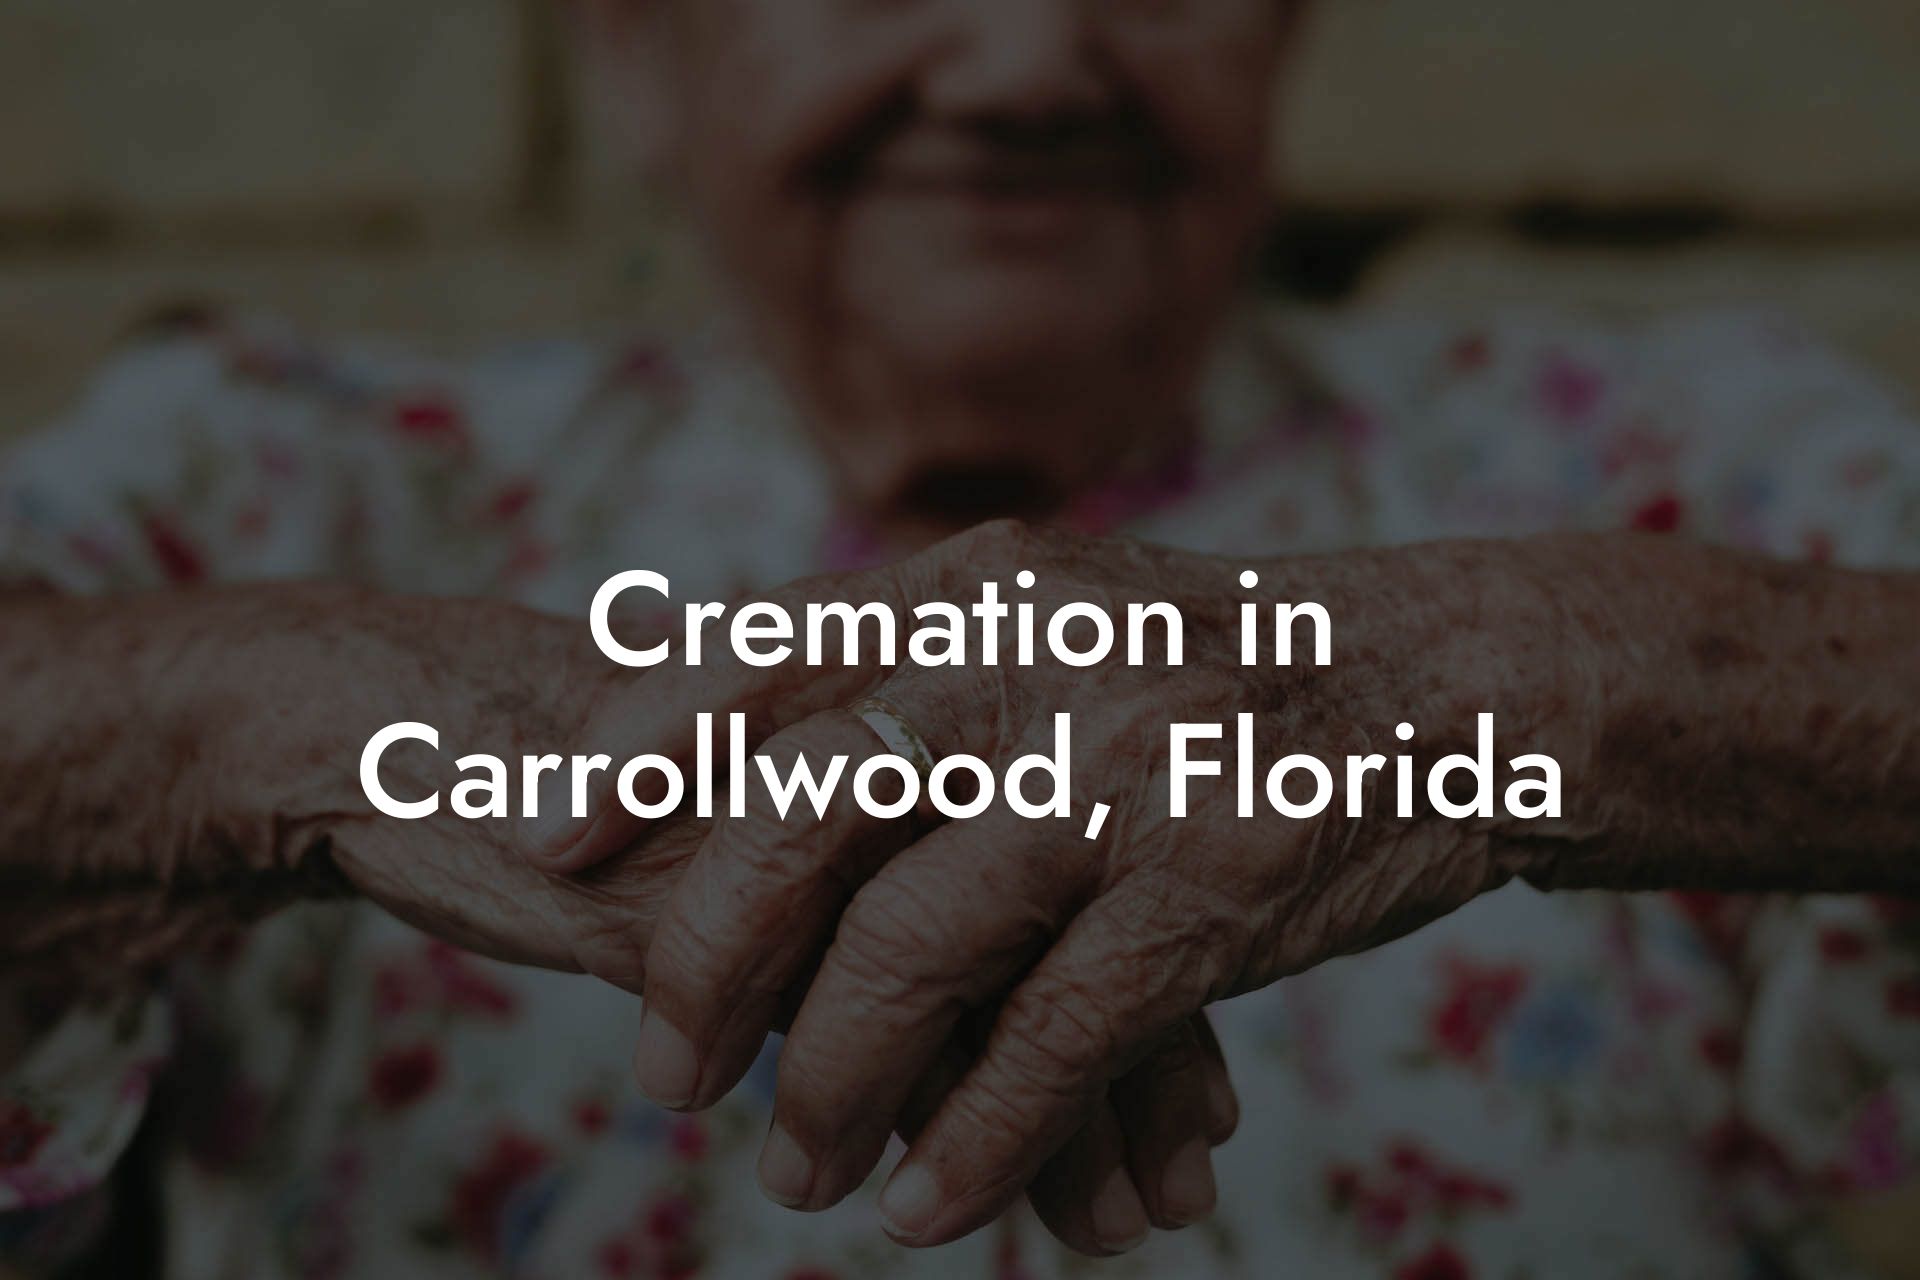 Cremation in Carrollwood, Florida